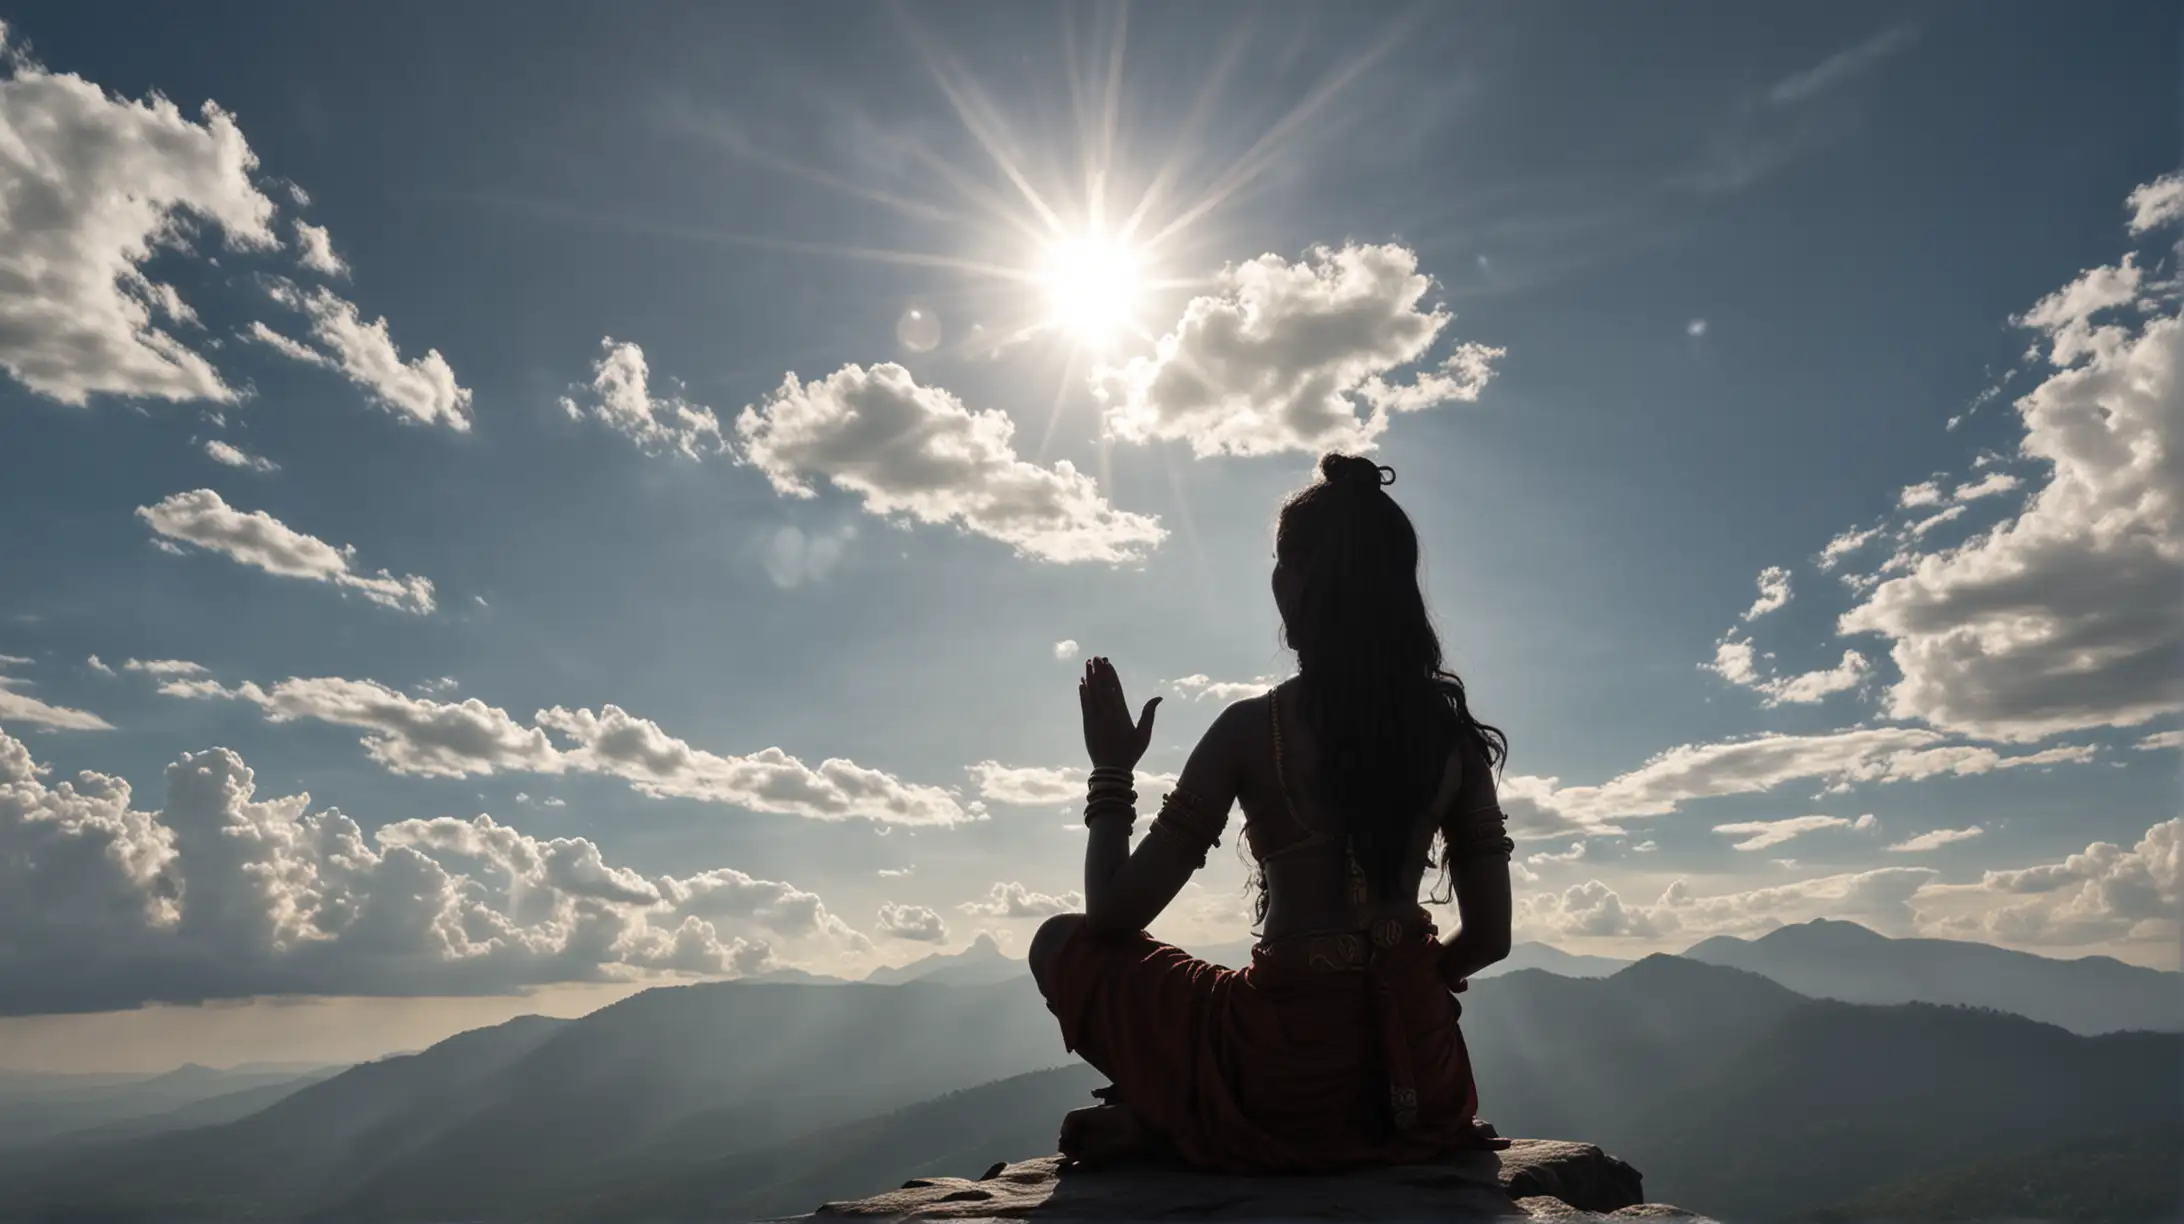 A girl reads mantras on the top of a mountain, the silhouette of Sri Shiva Sahasranama are visible in the sky, clouds 